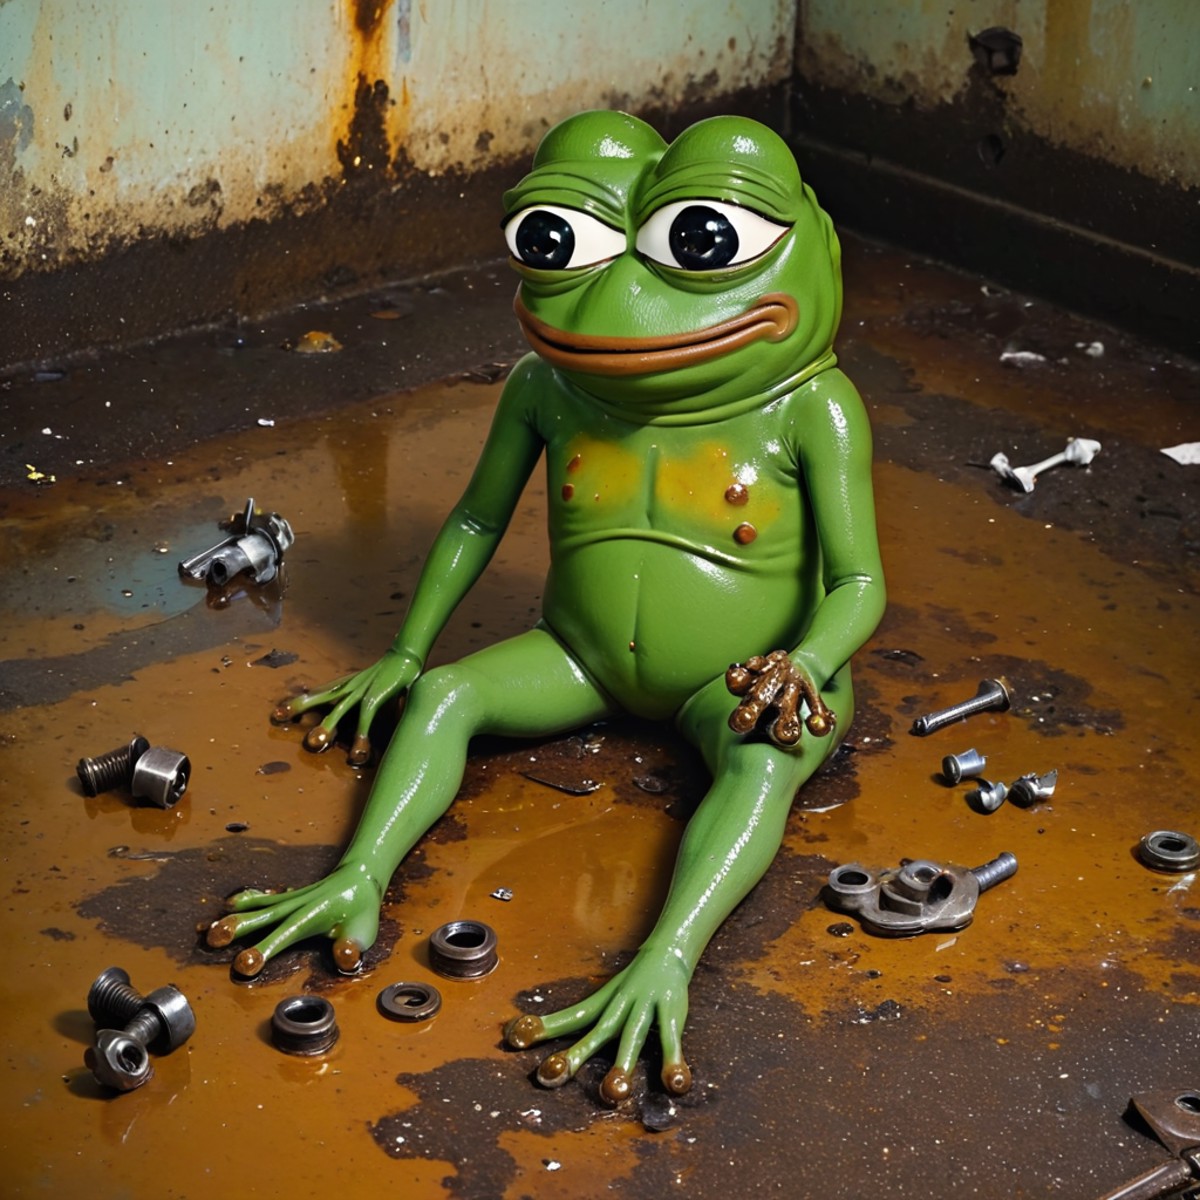 A place with oil stains on the floor with remains of bodywork and screws and a lot of rusty things, (((pepe_frog))), 1 boy...